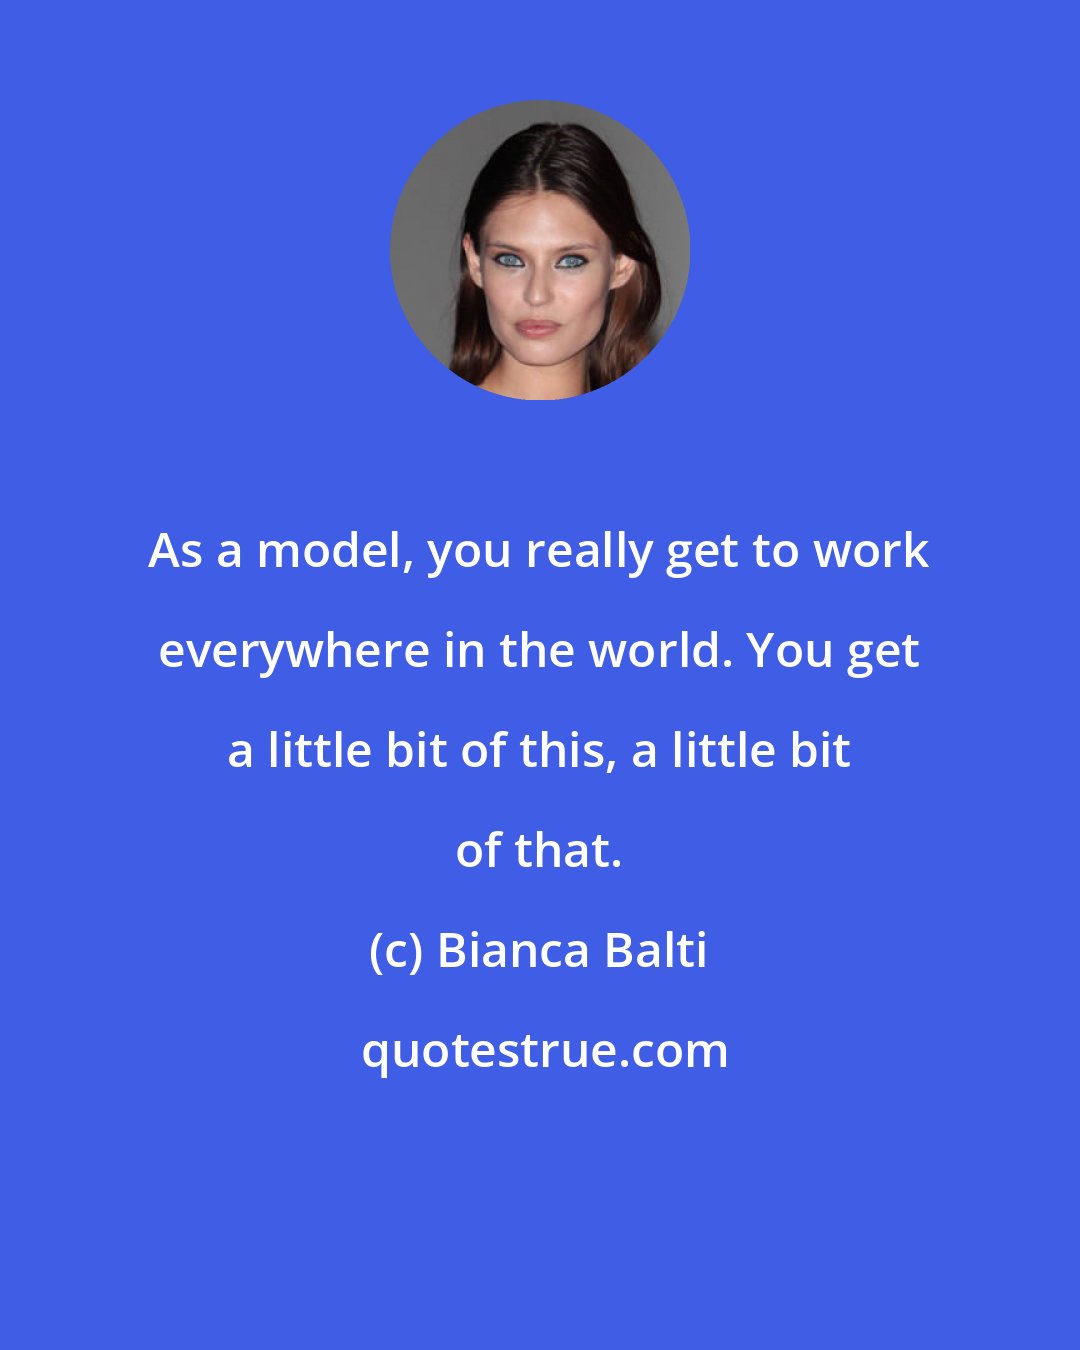 Bianca Balti: As a model, you really get to work everywhere in the world. You get a little bit of this, a little bit of that.